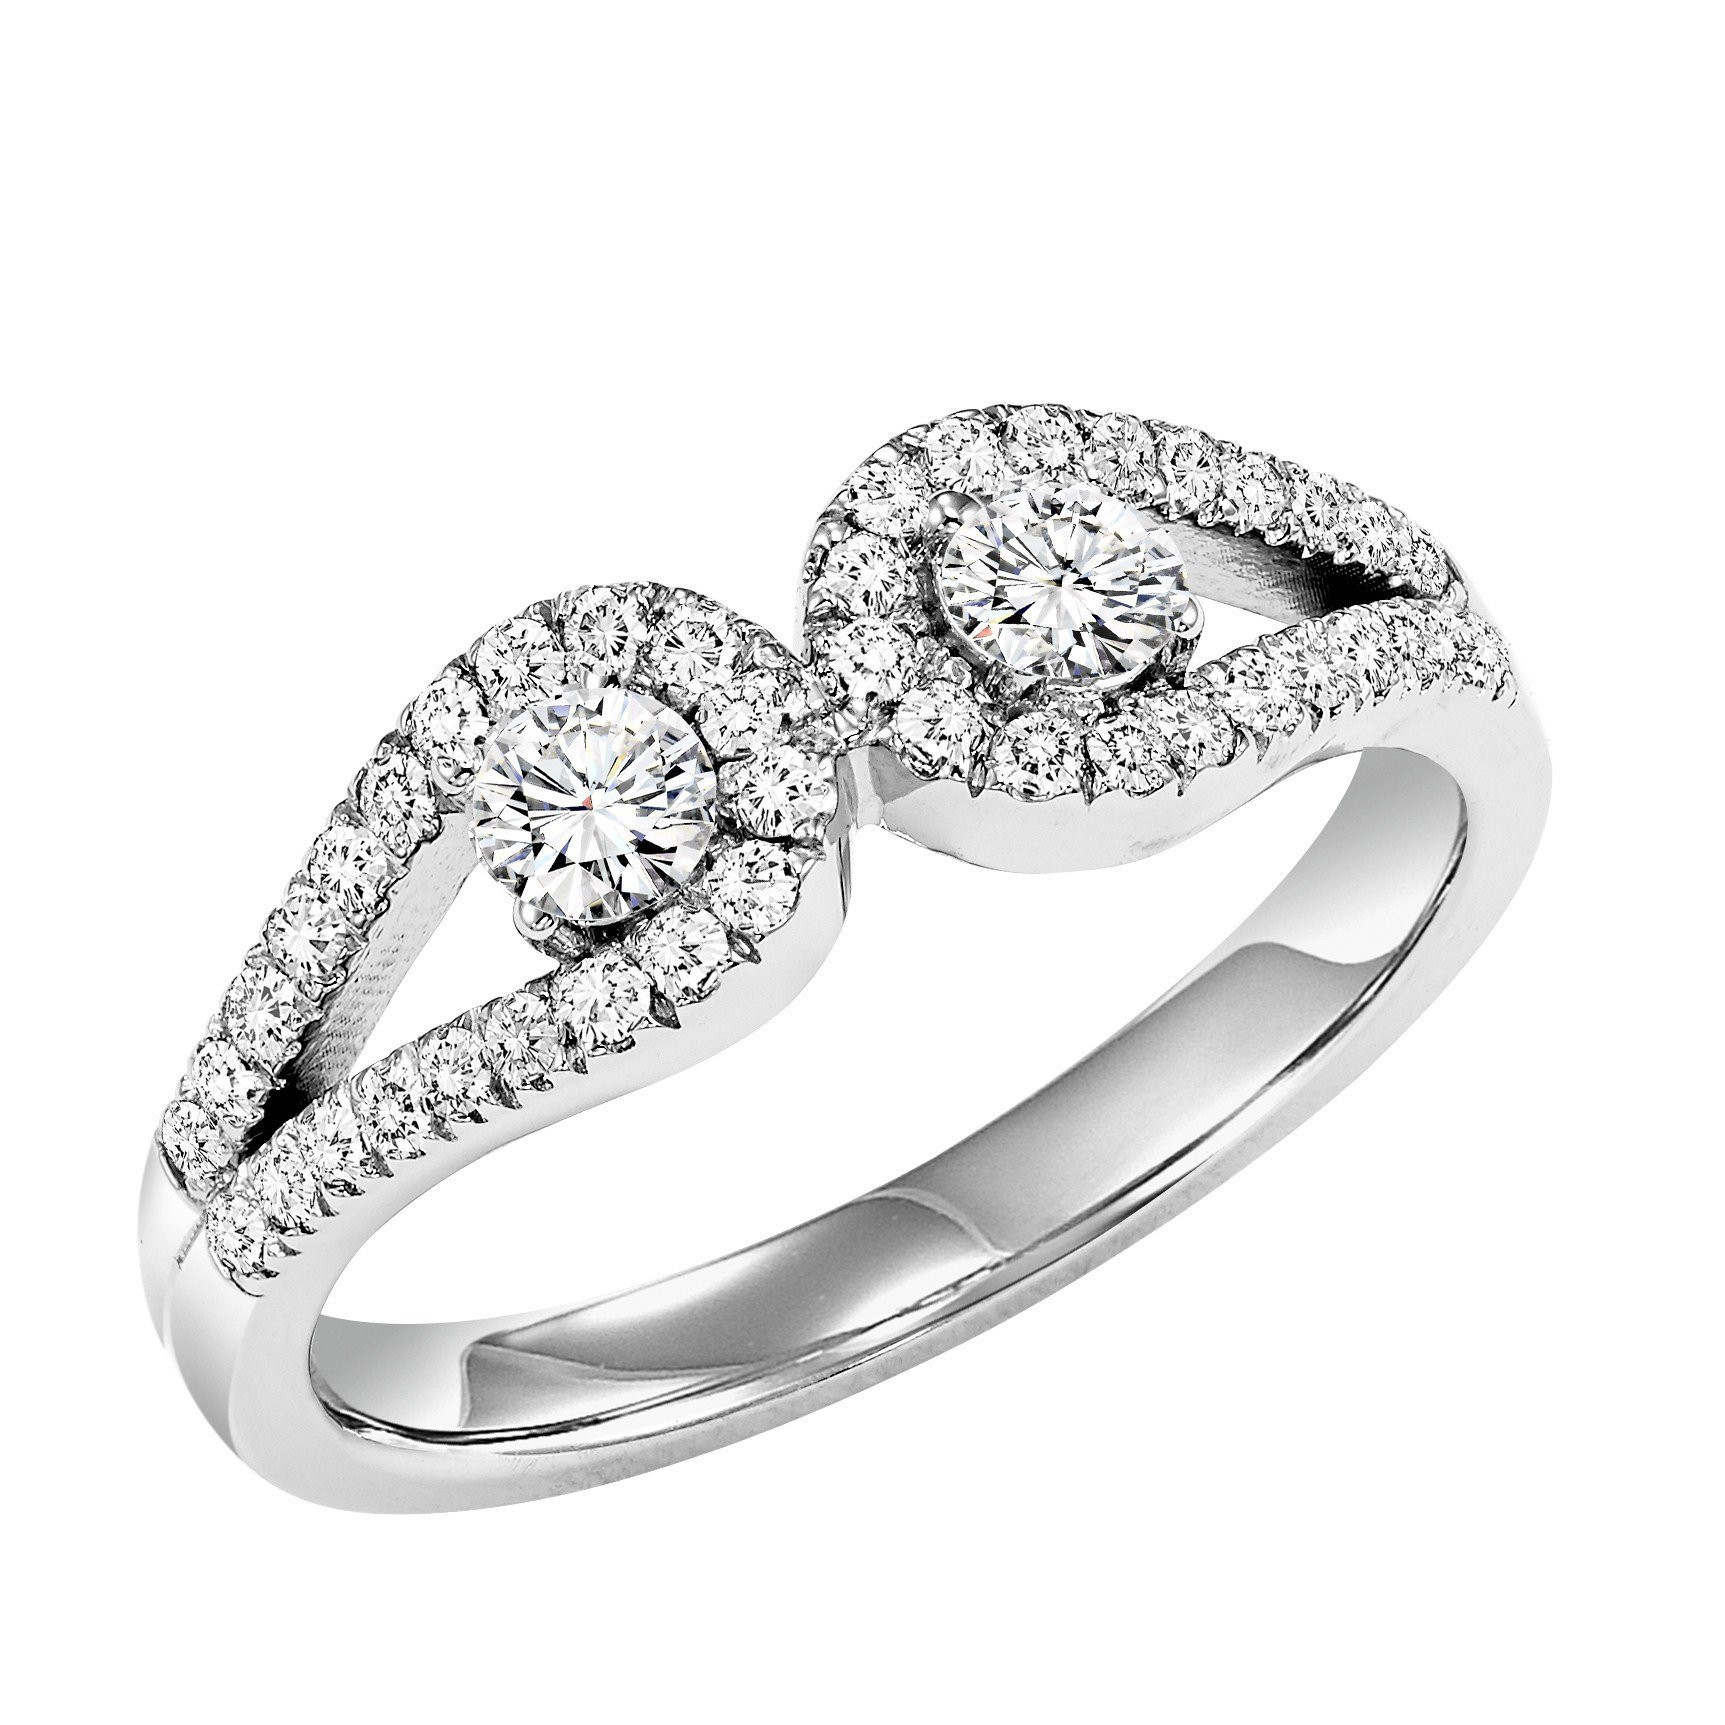 2 Stone Diamond Rings
 14K White Gold Two her 1 2cttw 2 Stone Plus Looped